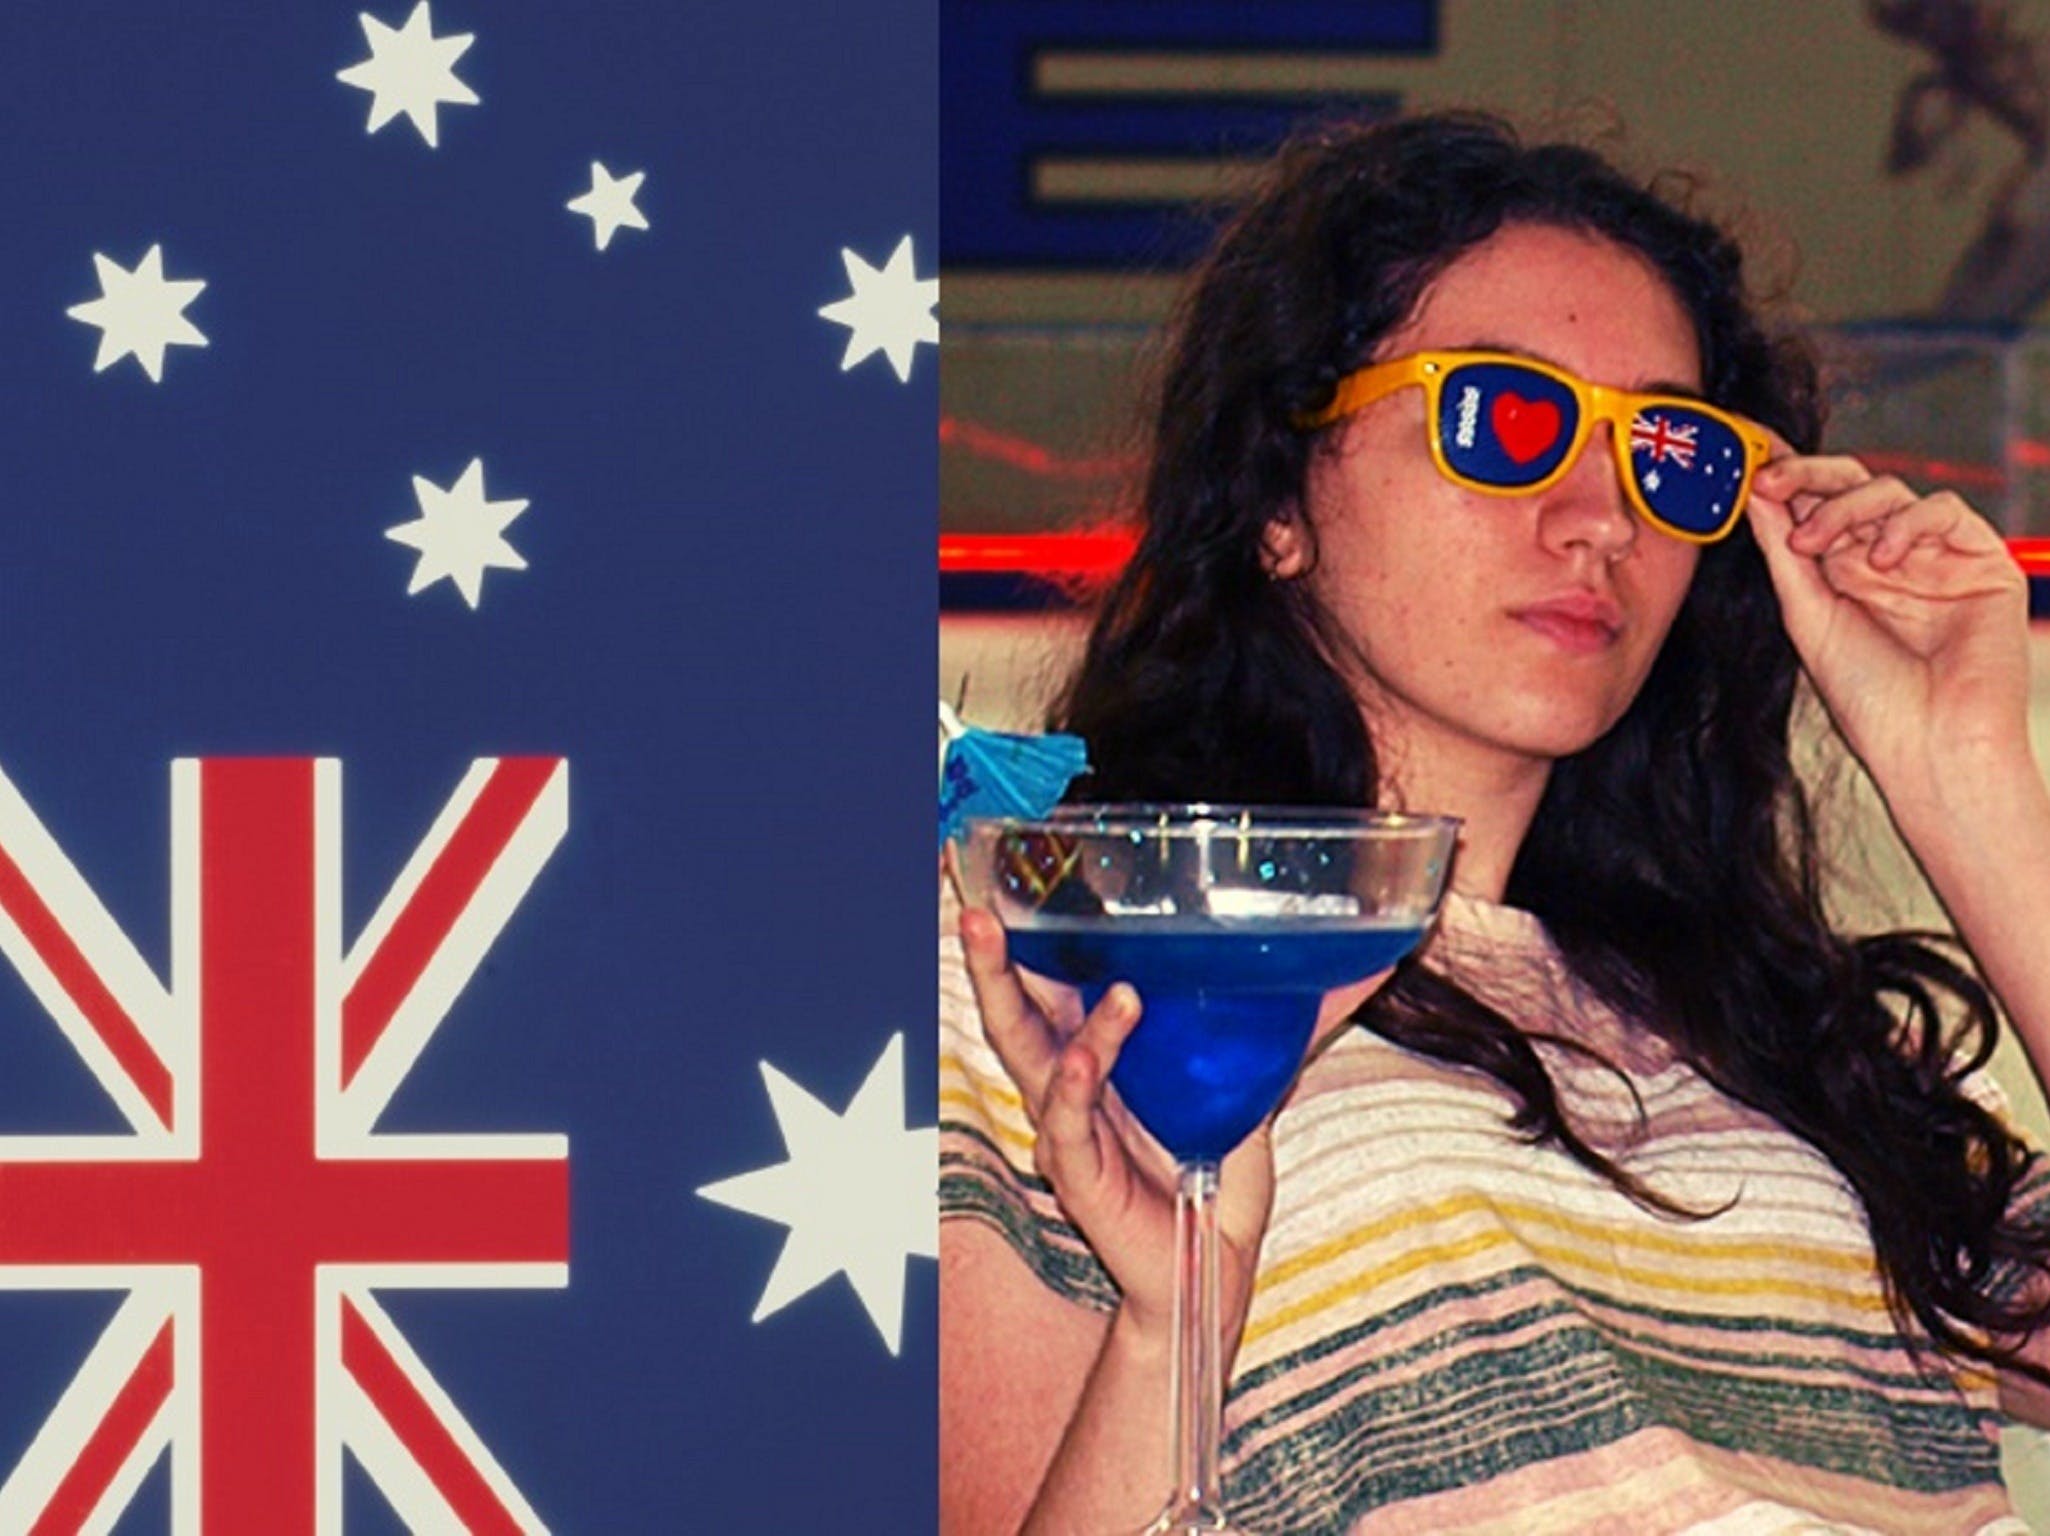 Celebrate Australia Day all weekend at Ice Zoo - Pubs and Clubs